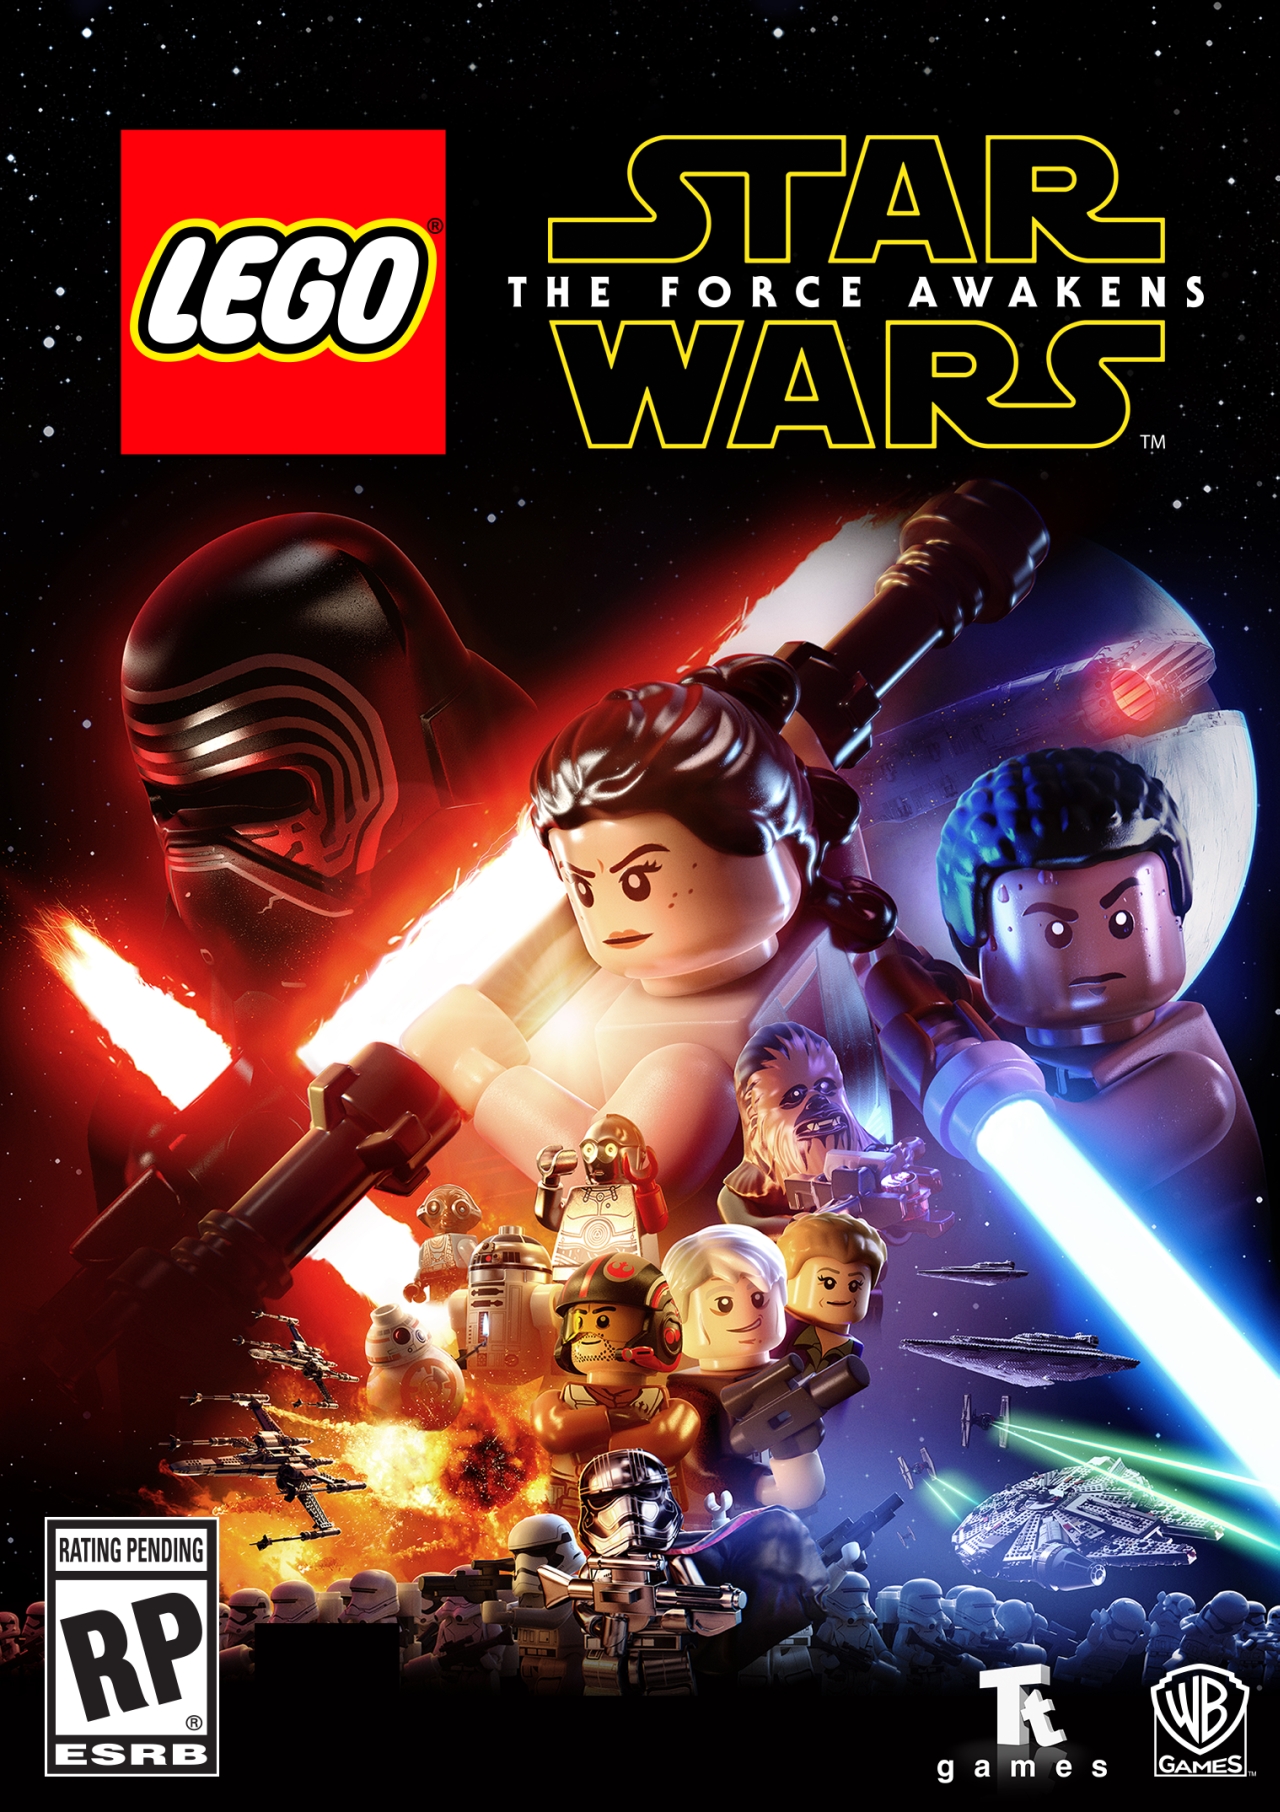 lego star wars the force awakens clone wars character pack